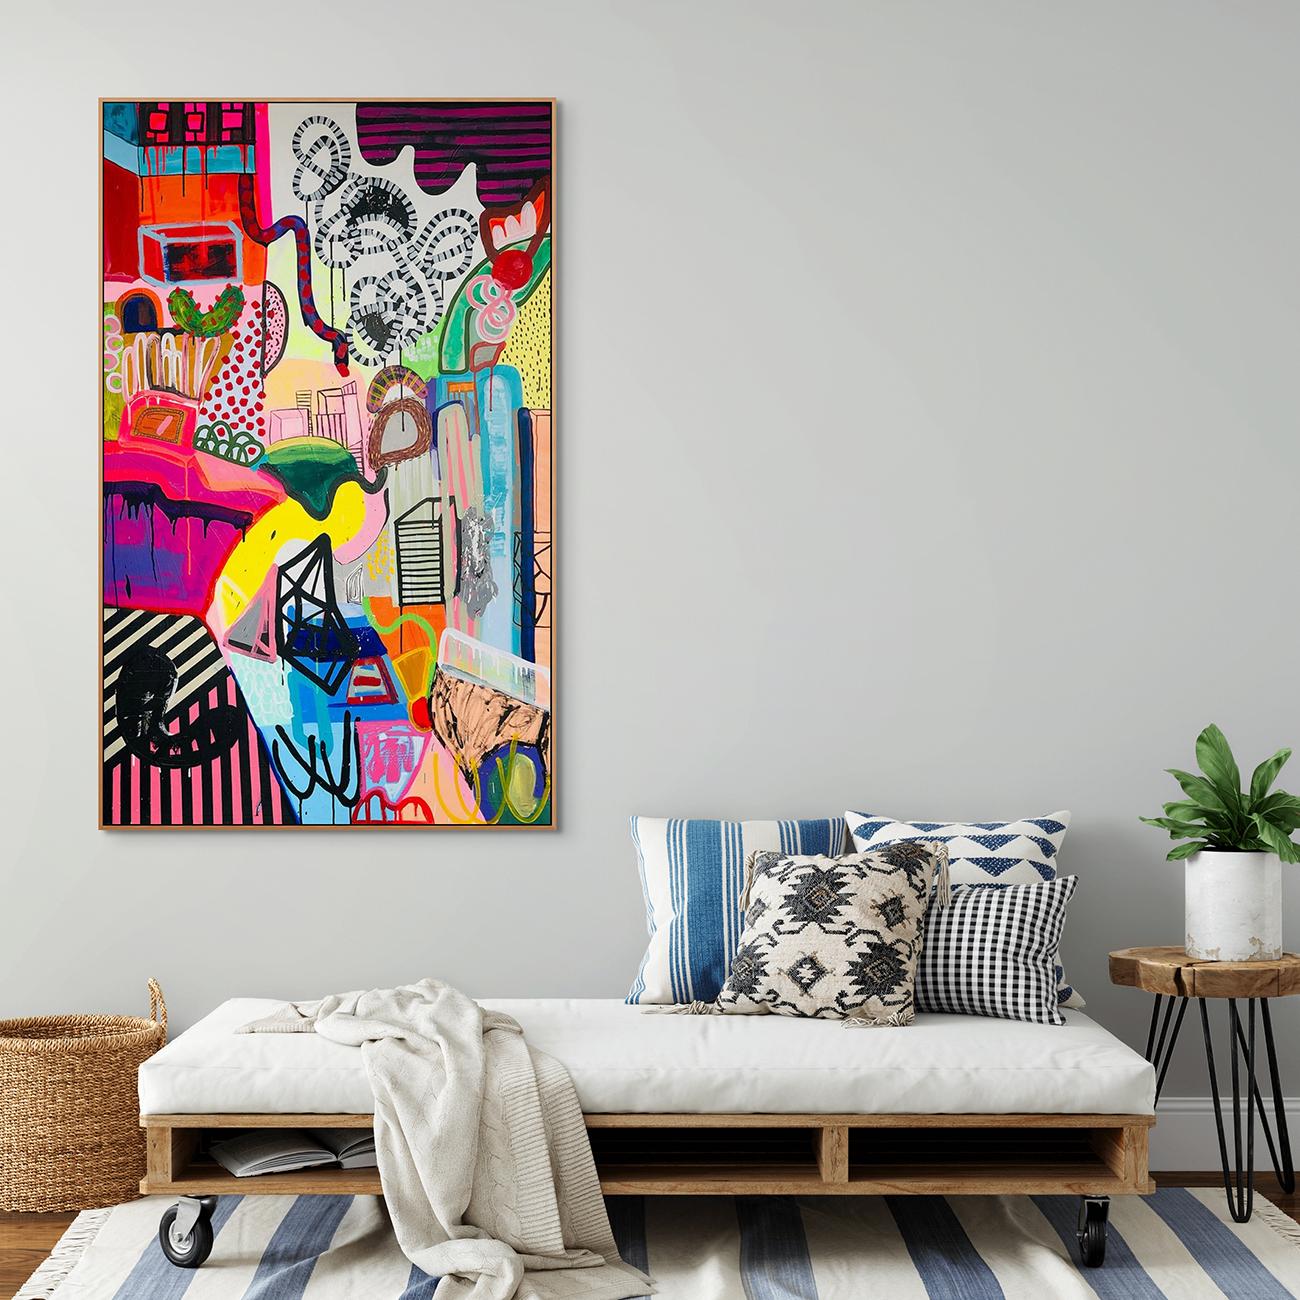 Vista I (Abstract painting)

Acrylic and Gouache on canvas - unframed
Artwork is exclusive to IdeelArt.
Daniela Marin stands as a pioneering figure in the realm of South American abstract art, masterfully weaving a vibrant array of colours that